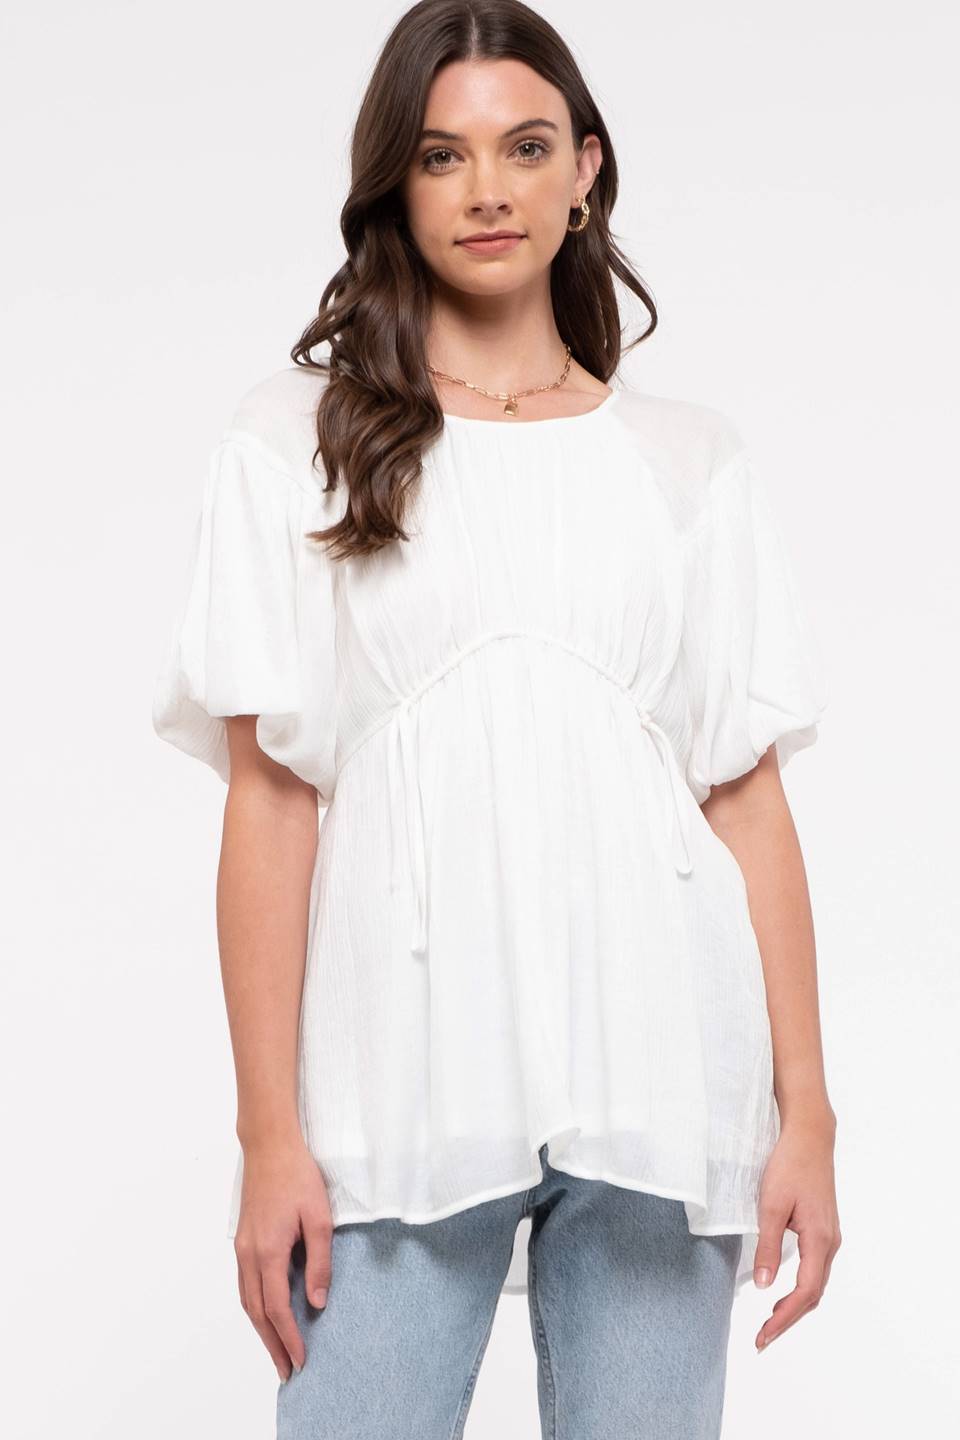 Always Yours Empire Waist Top Free People Vibes